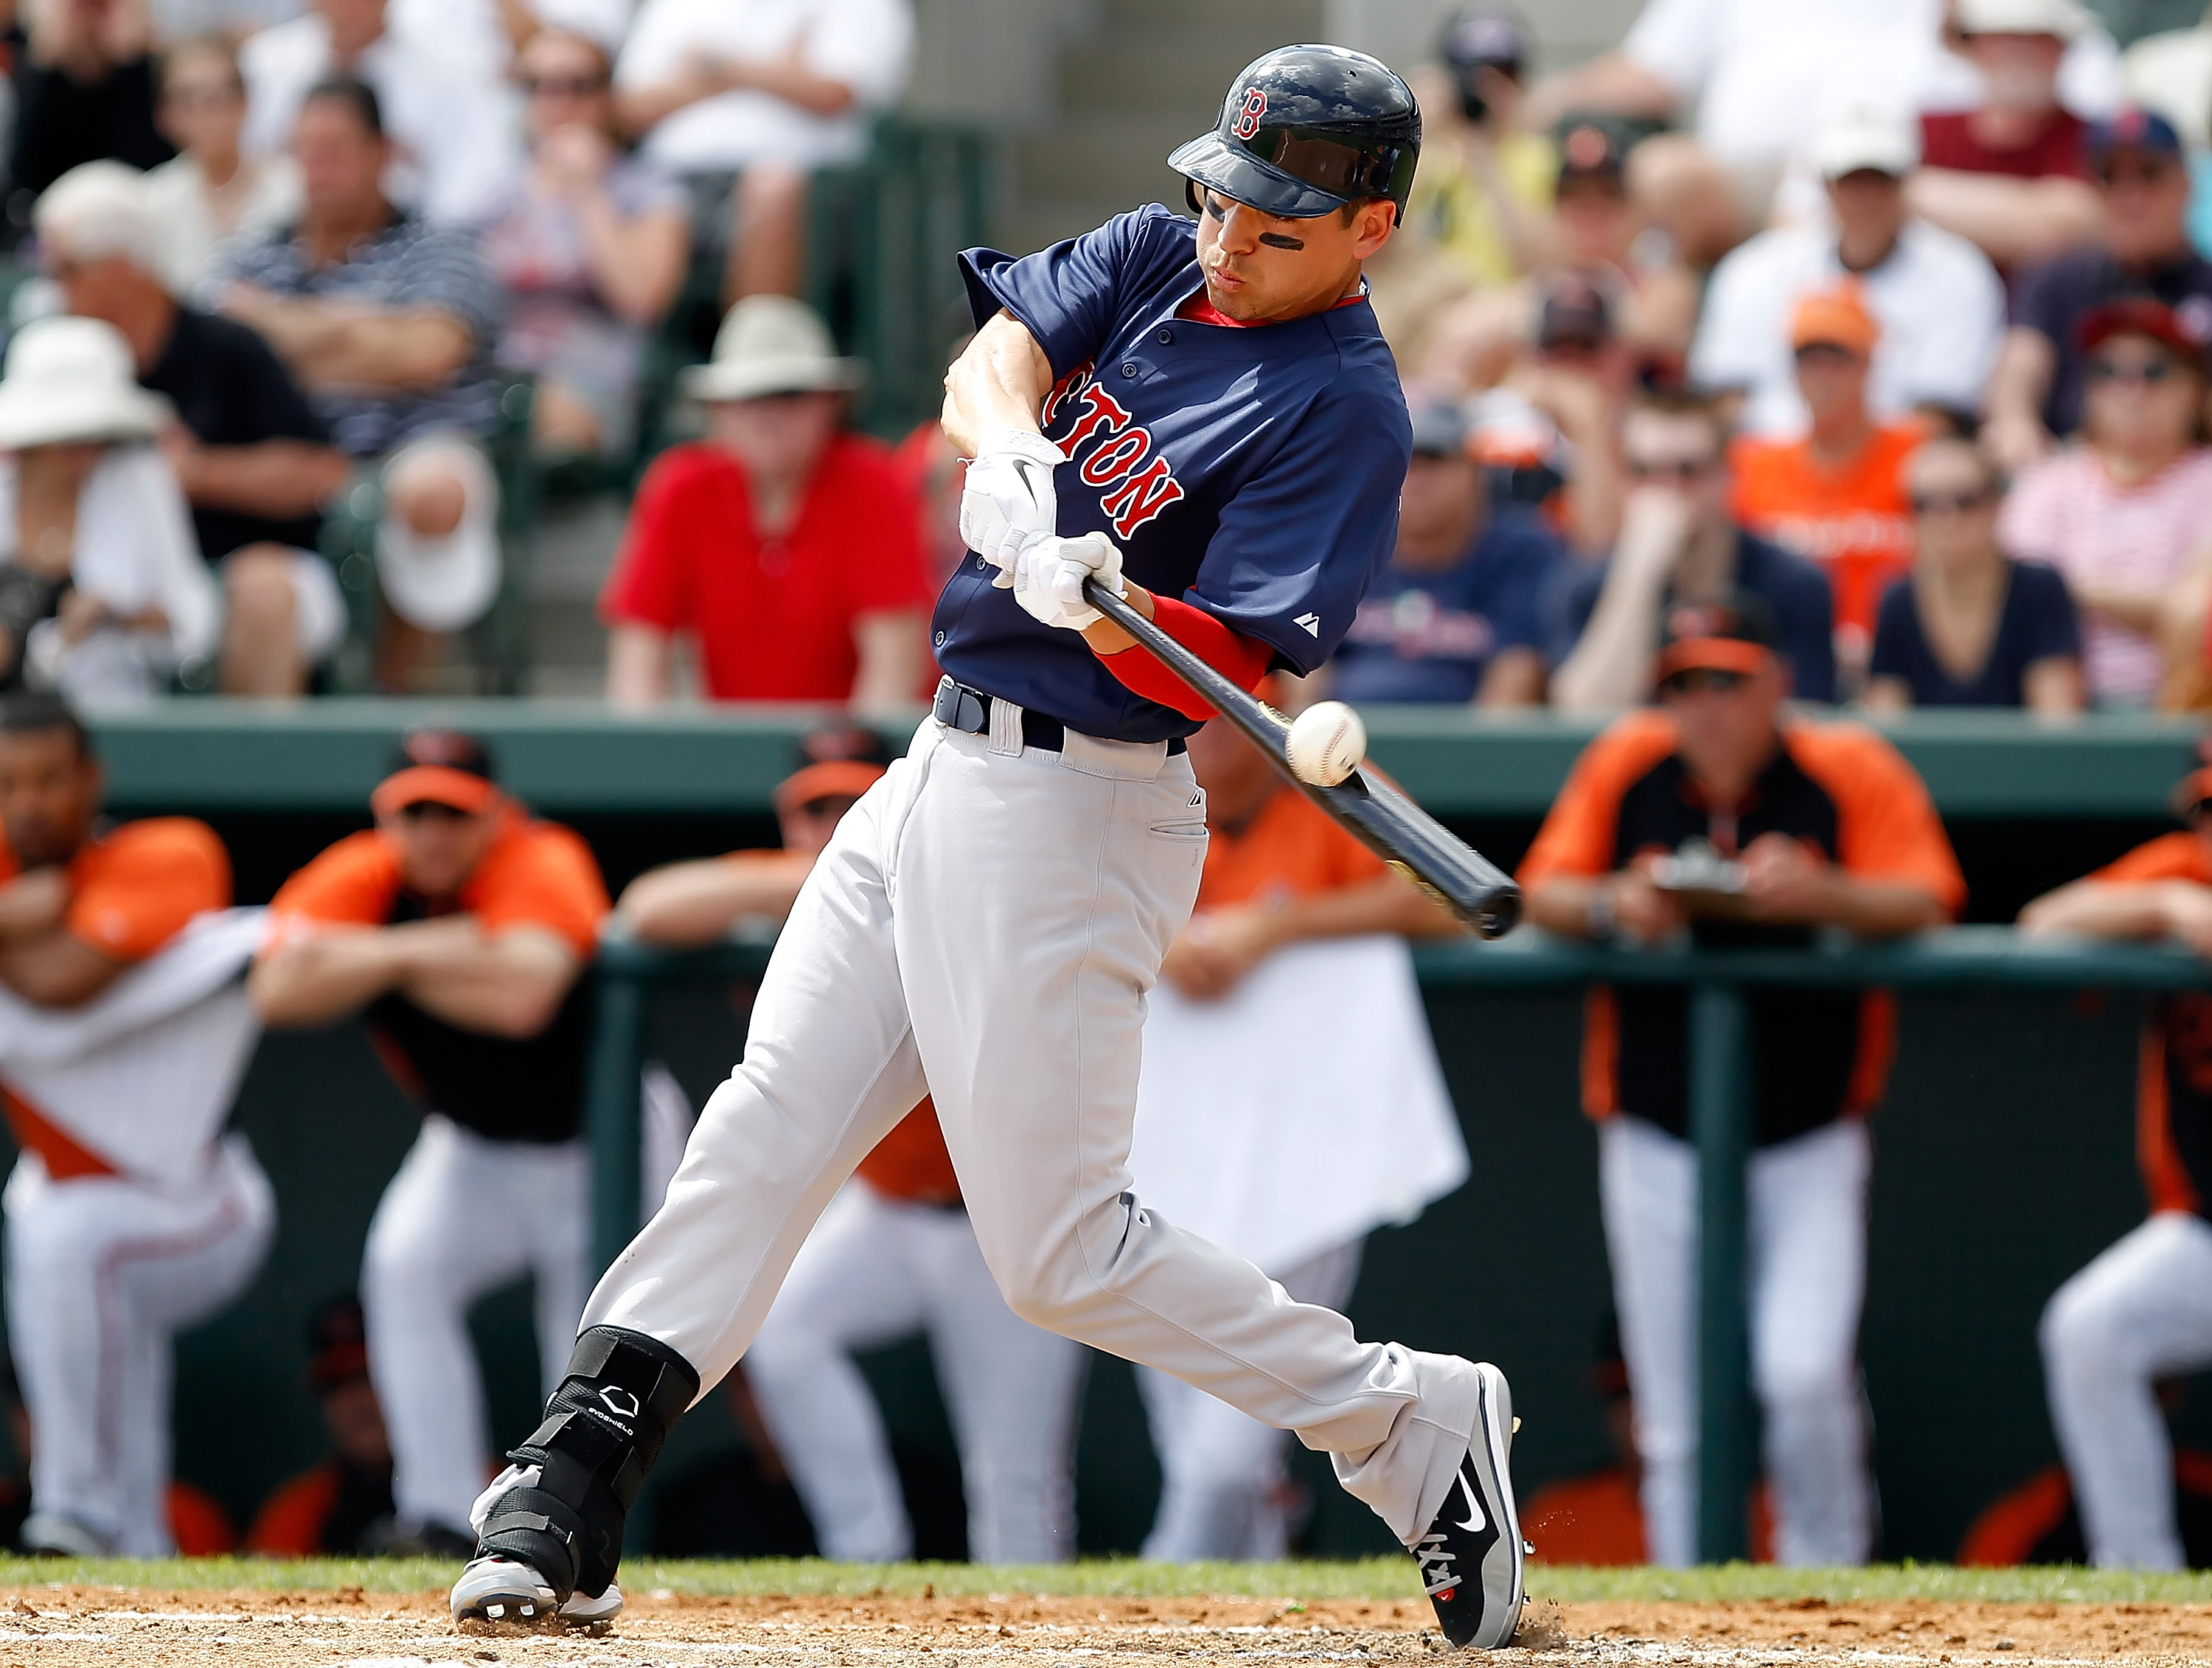 SARASOTA, FL - MARCH 05:  Outfielder Jacoby Ellsbury #2 of the Boston Red Sox fouls off a pitch against the Baltimore Orioles during a Grapefruit League Spring Training Game at Ed Smith Stadium on March 5, 2011 in Sarasota, Florida.  (Photo by J. Meric/Ge